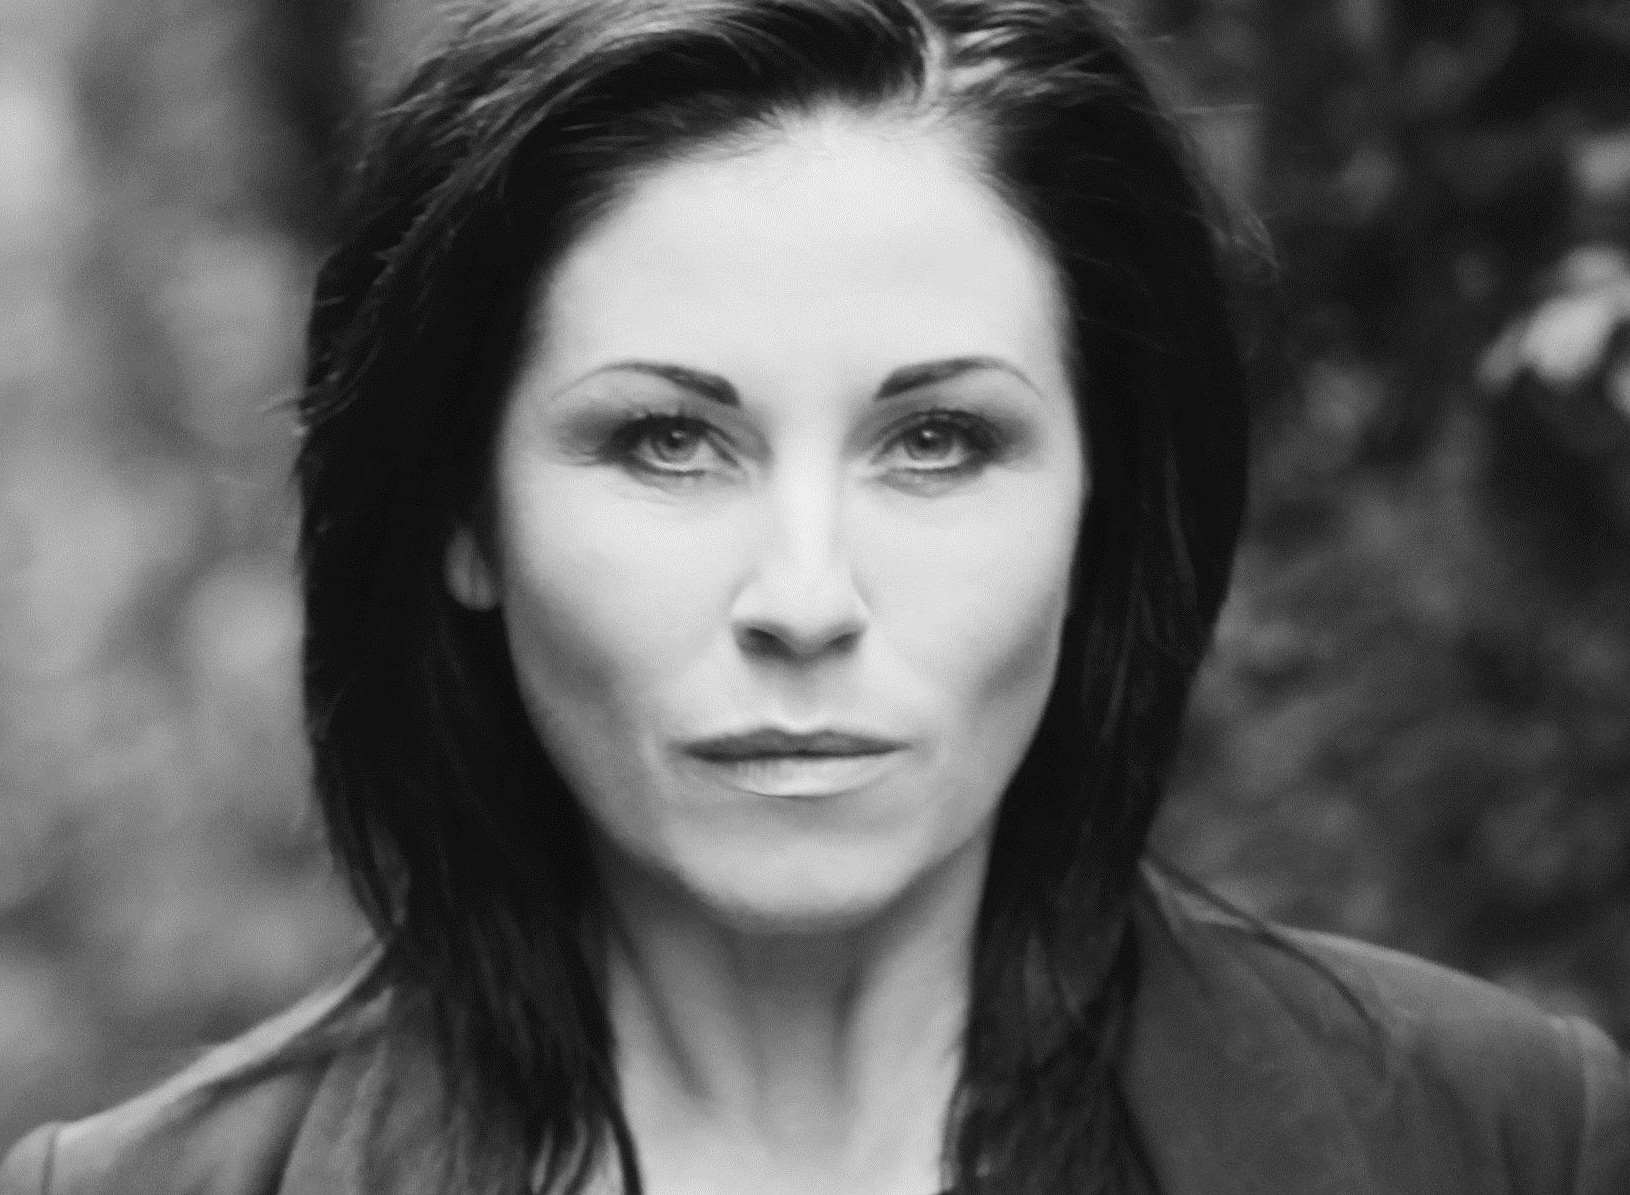 Jessie Wallace, appearing in Chicago